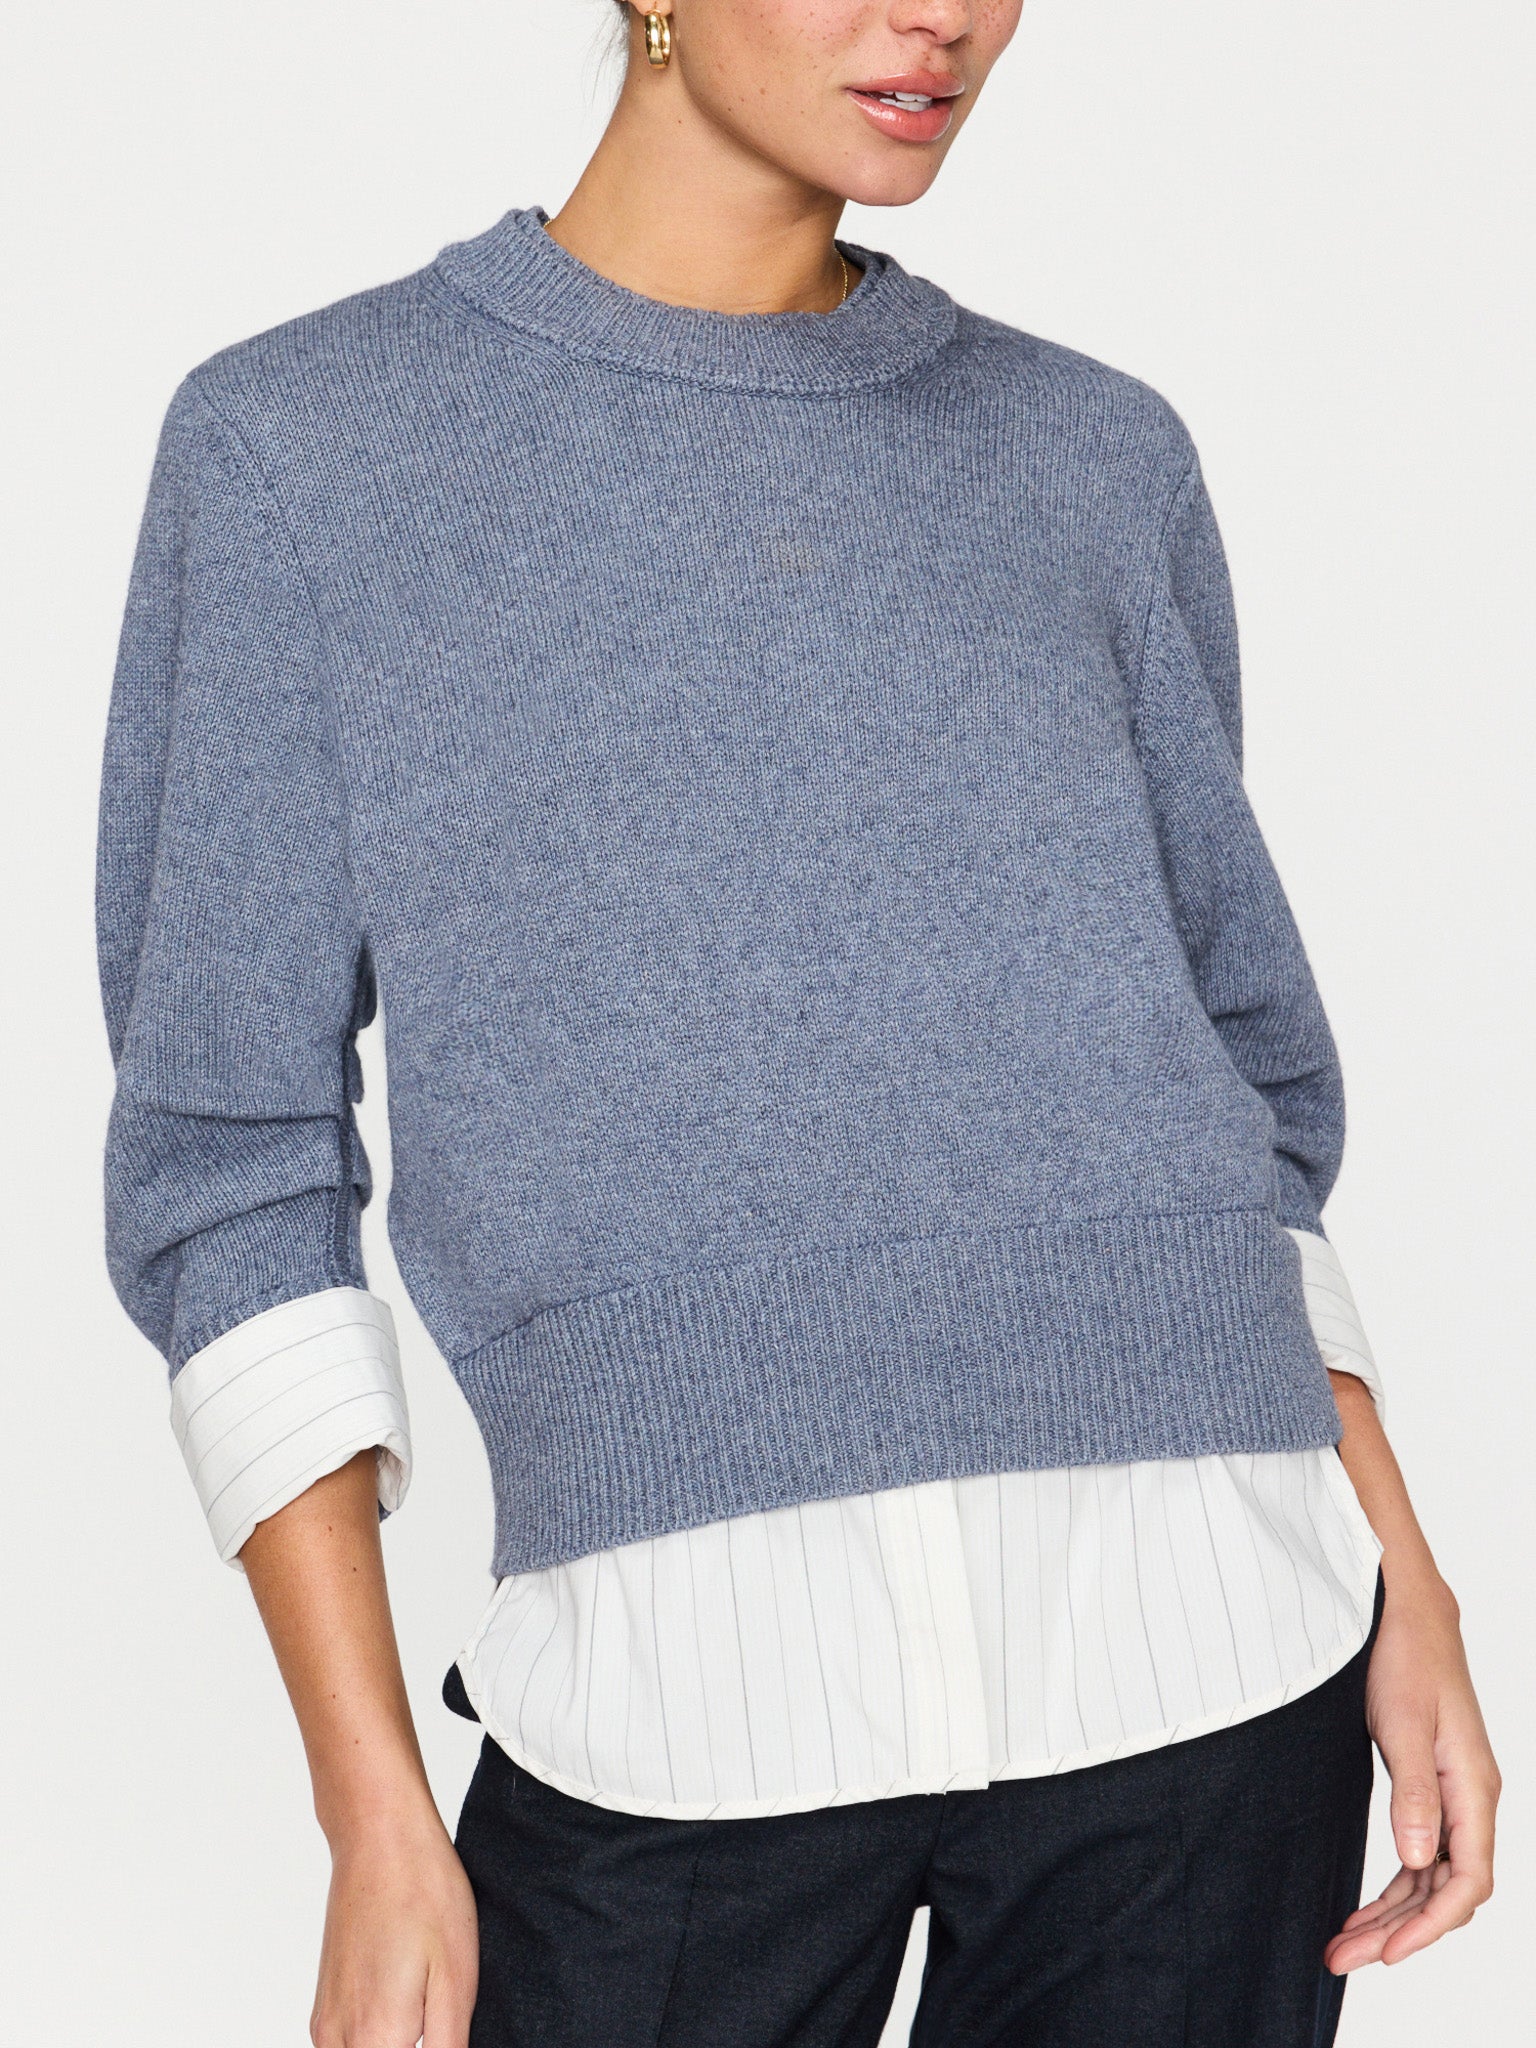 Raya blue ruched layered crewneck sweater front view 2